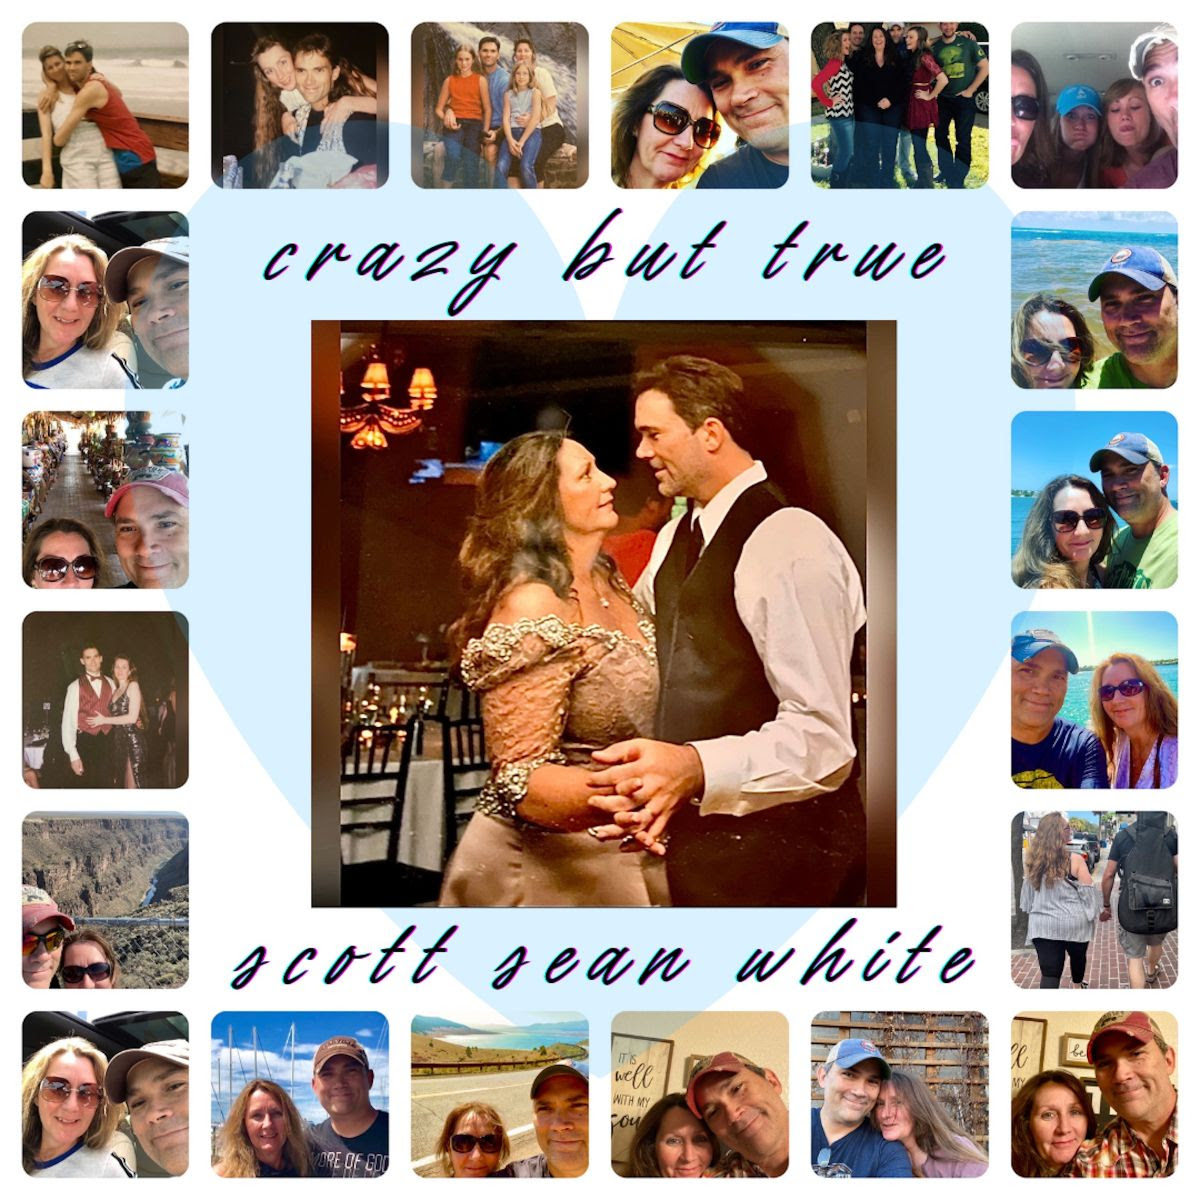 Art for Crazy But True (Acoustic) by Scott Sean White feat Jon Randall